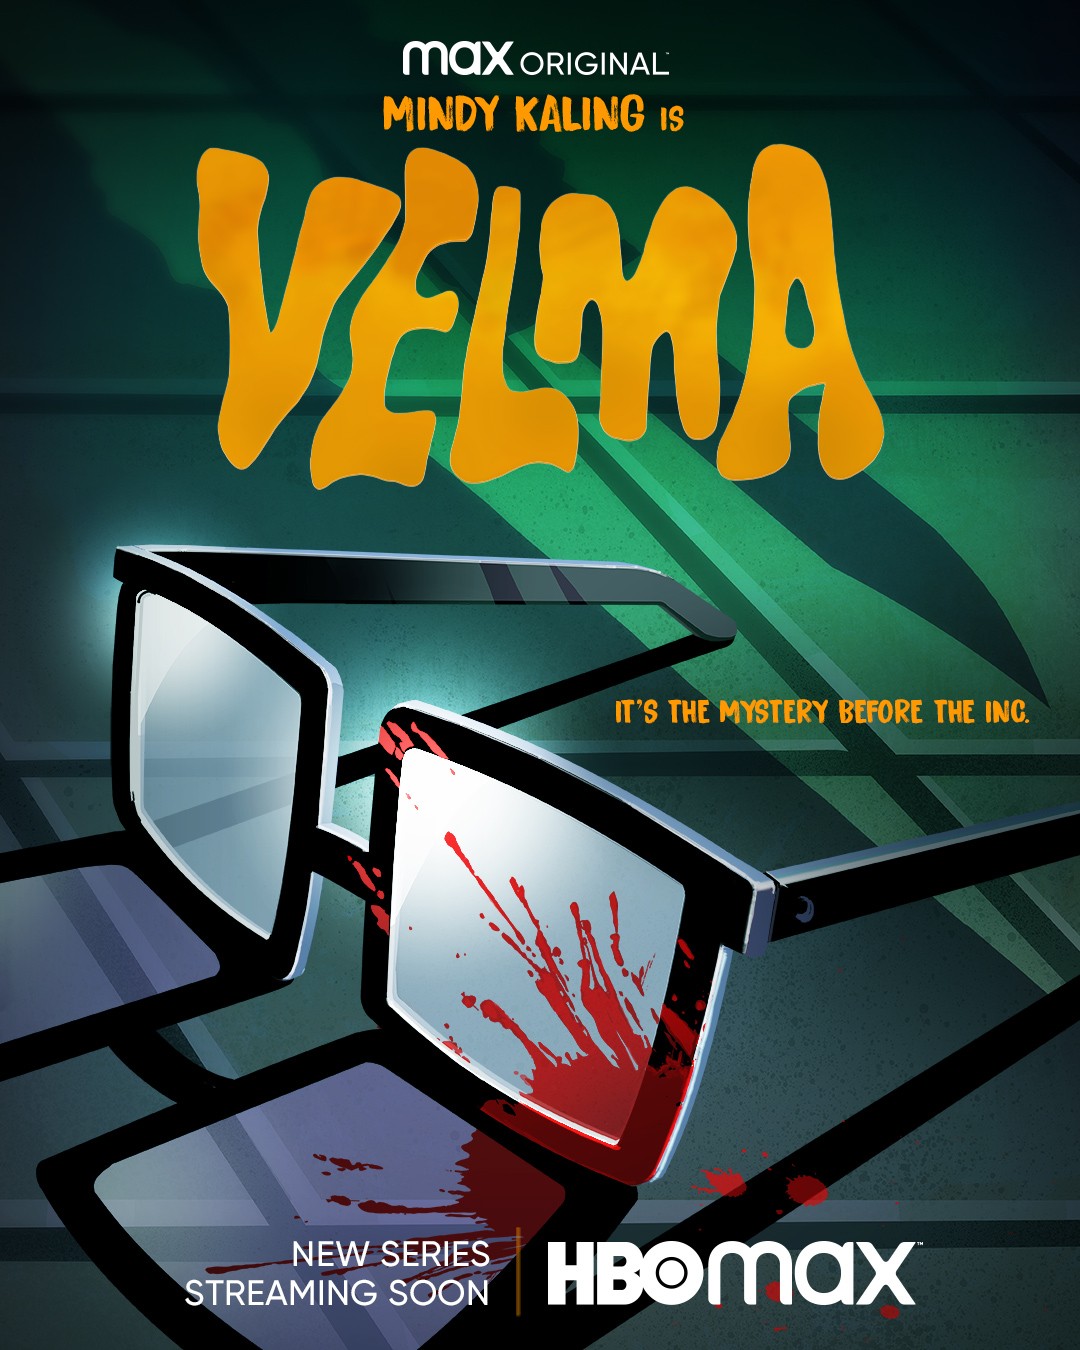 Velma review bomb explored amid low IMDb and Rotten Tomatoes scores